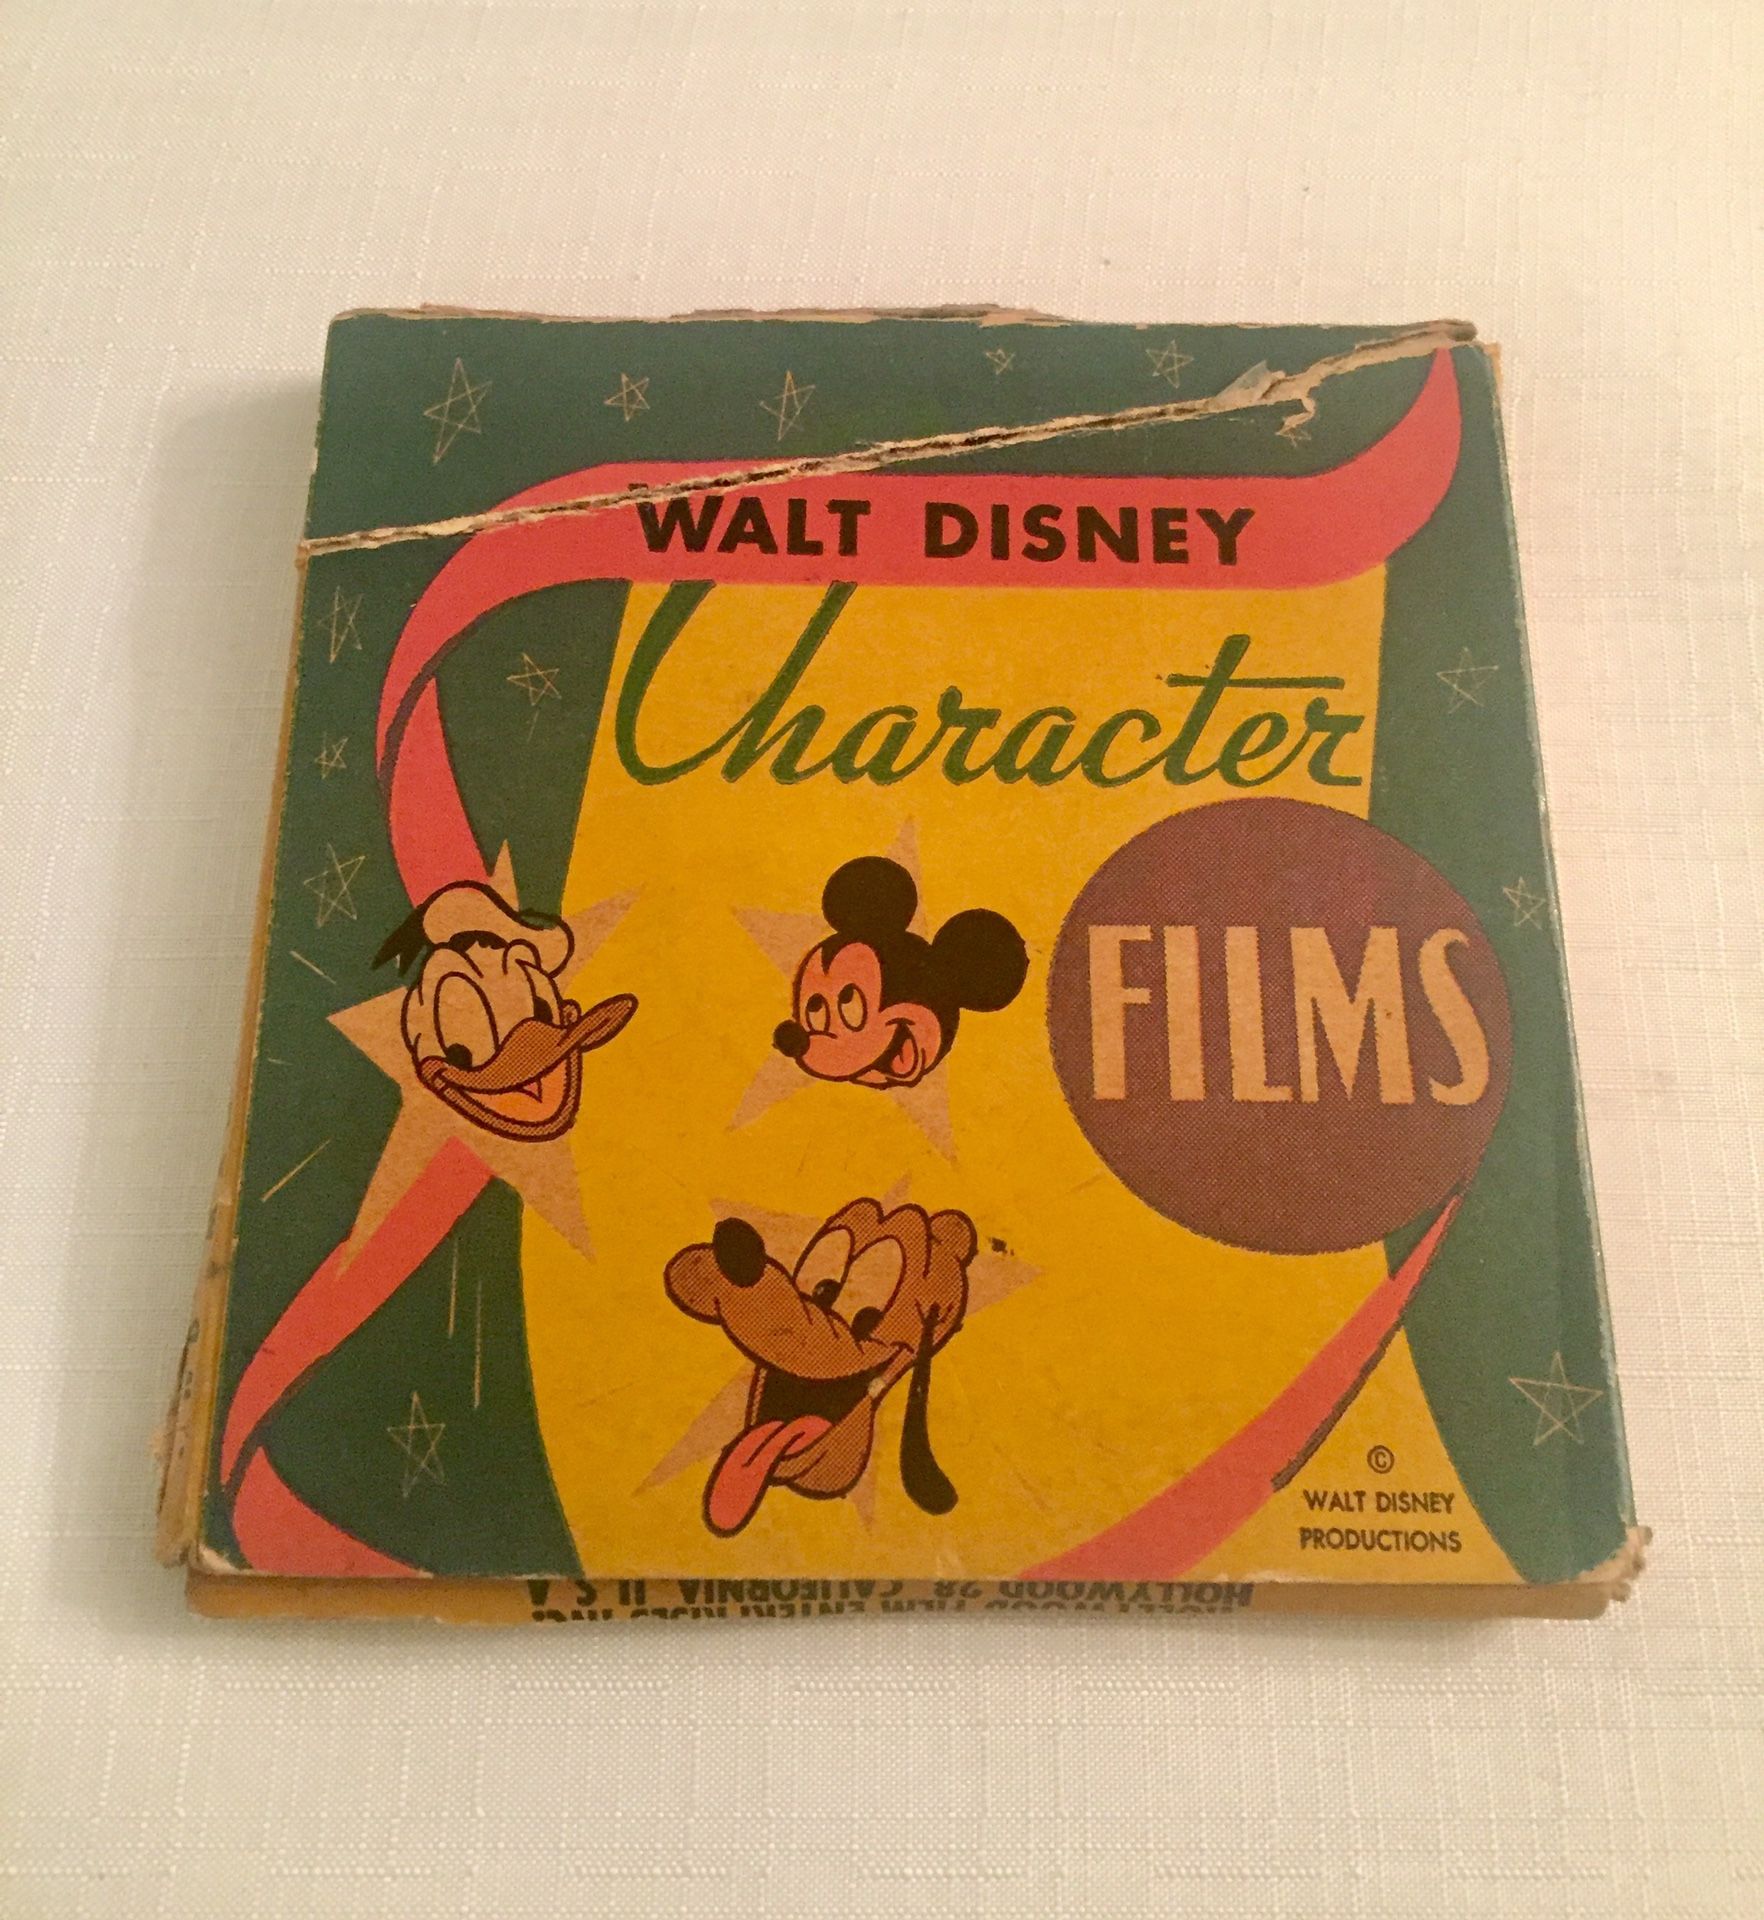 Old 8MM Disney Reel - note on box says part of the film is missing